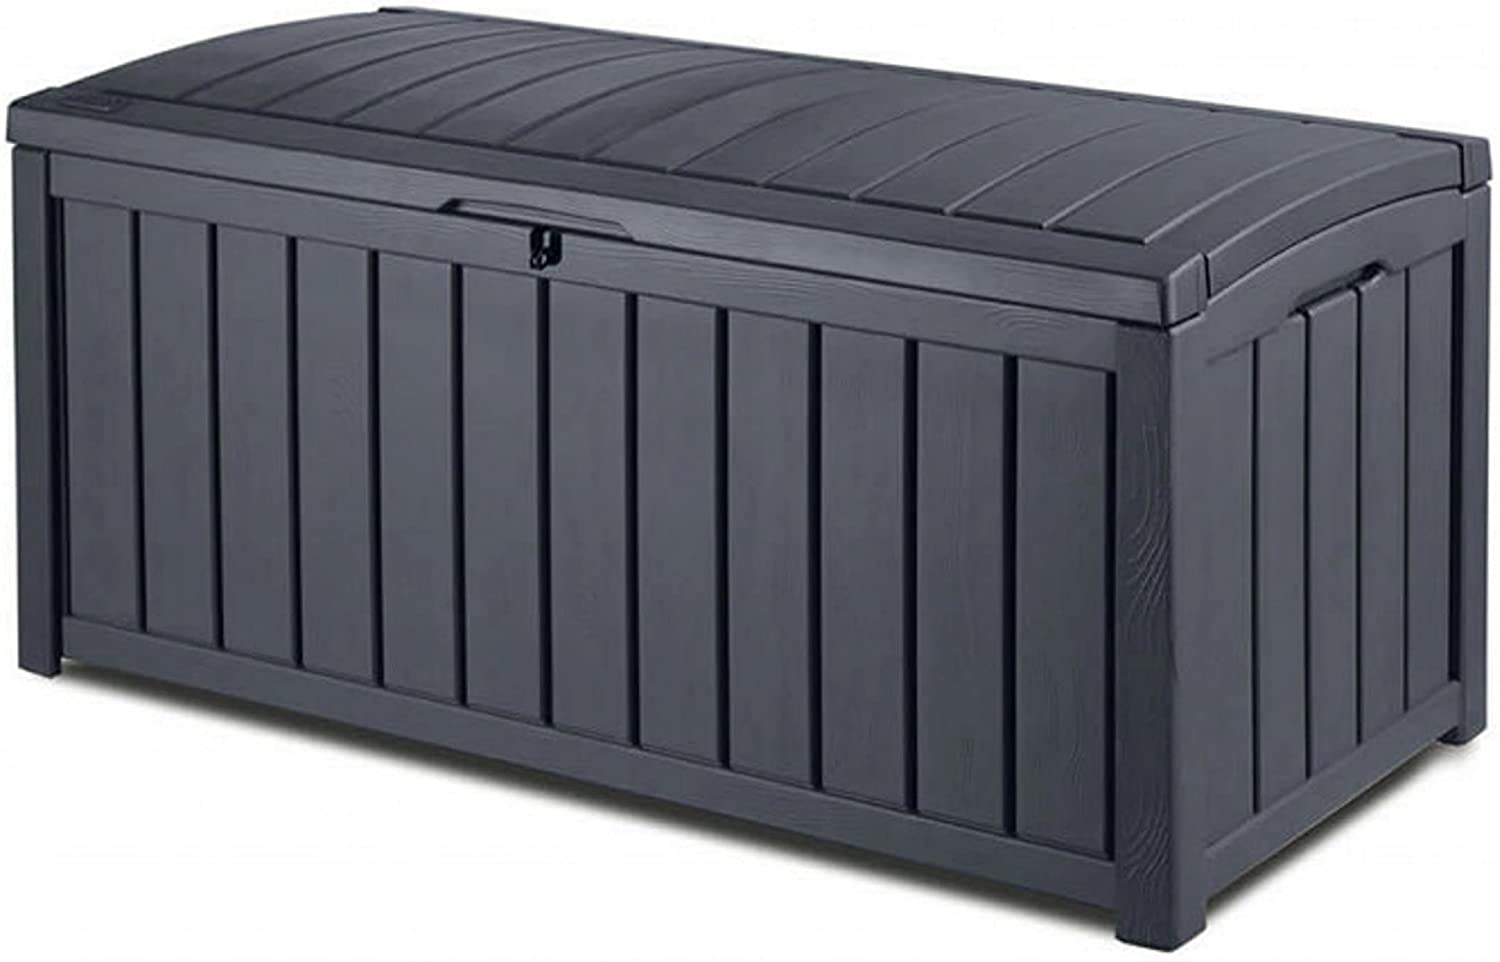 Stout Belastingbetaler bubbel Keter Glenwood Plastic Deck Storage Container Box Outdoor Patio Furnit –  Salvage & Co Indy